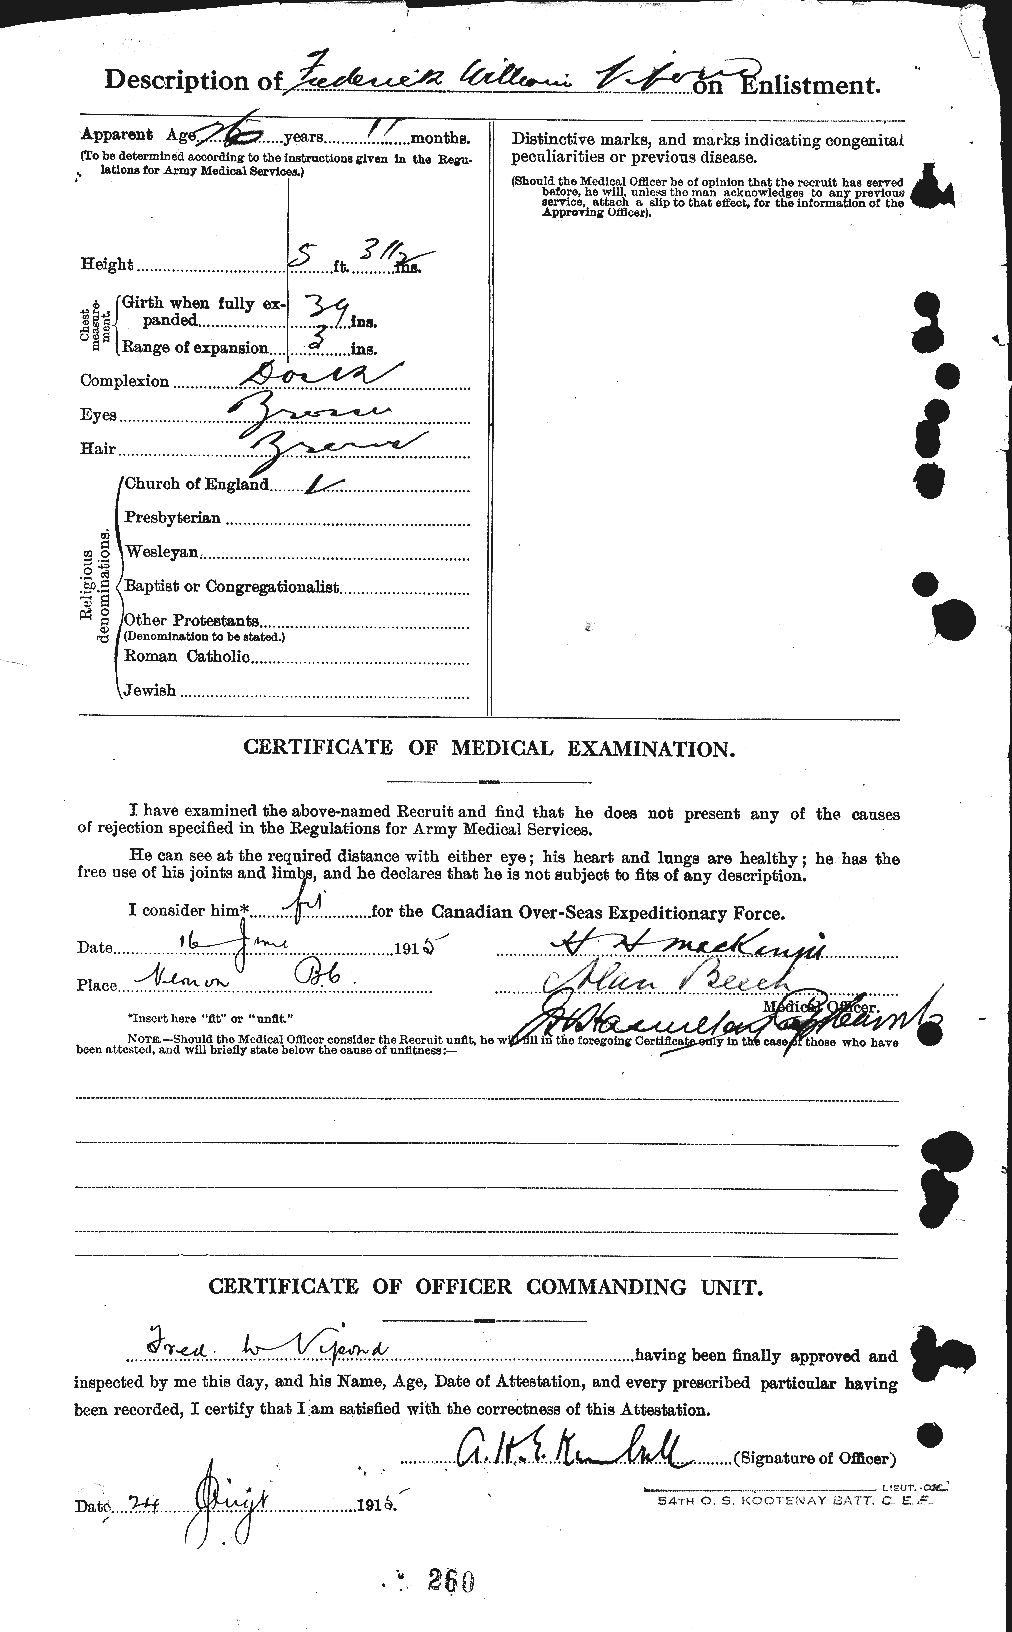 Personnel Records of the First World War - CEF 648723b